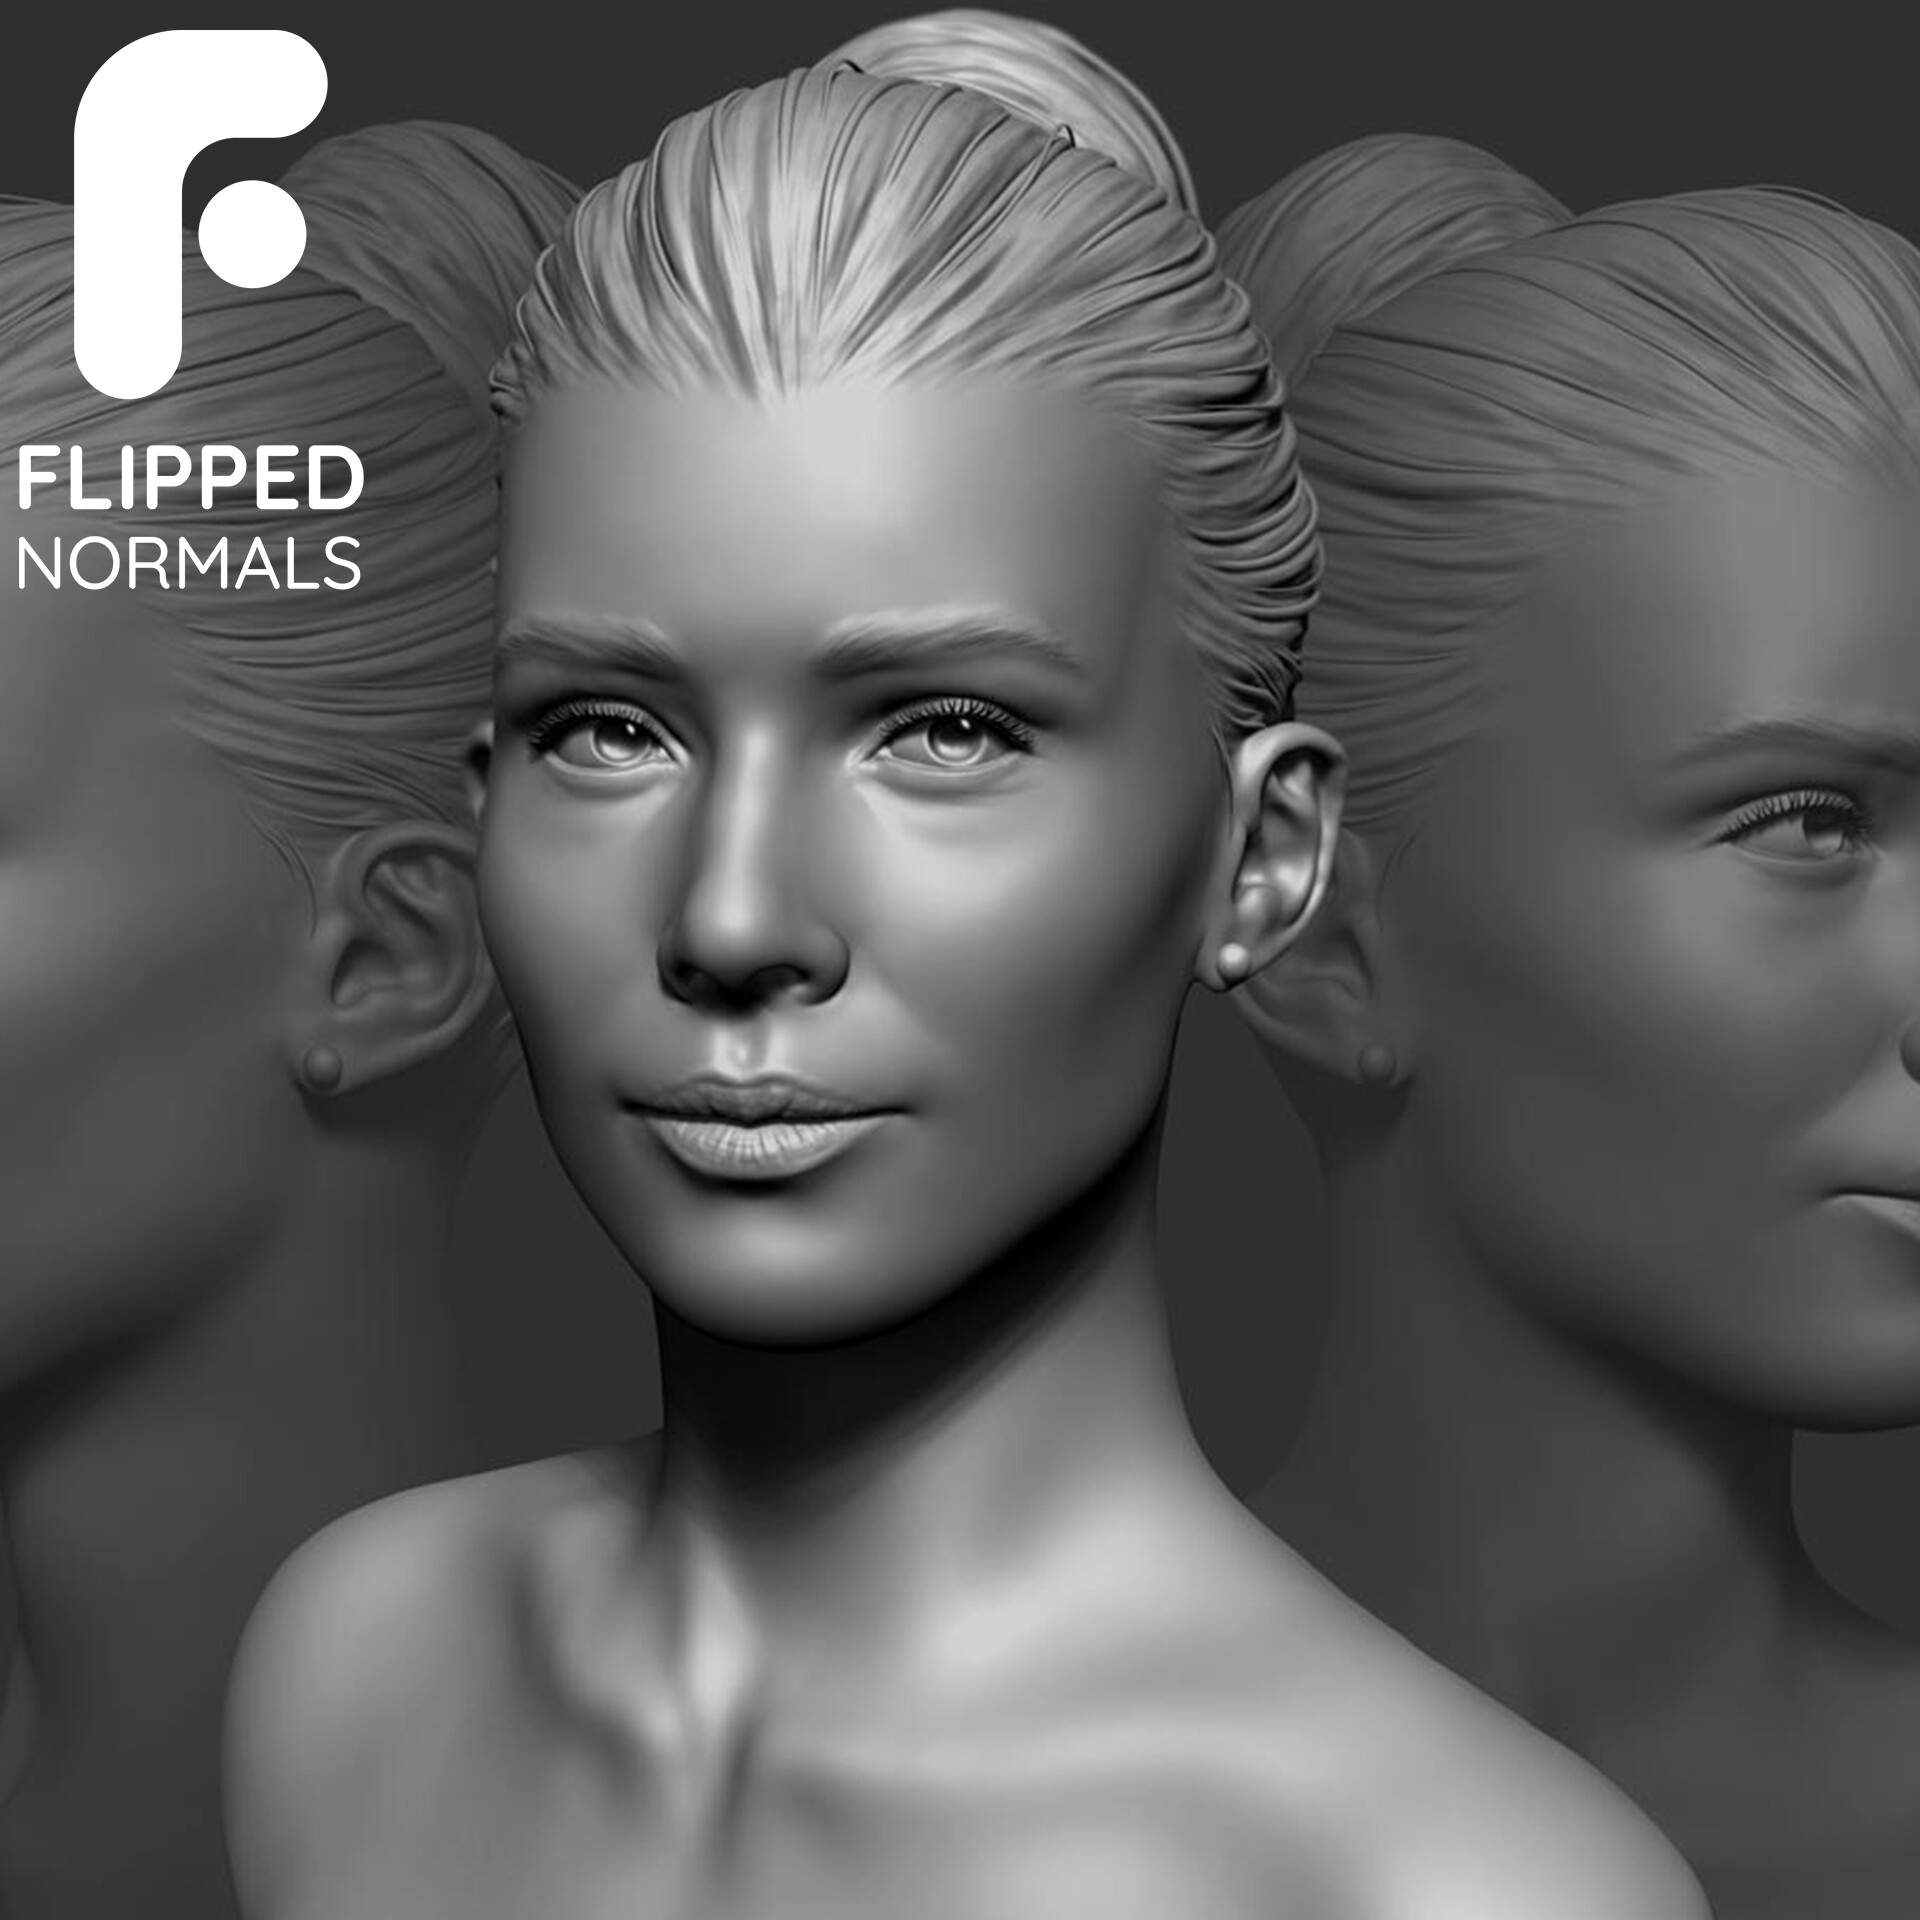 resculpt model zbrush into another face